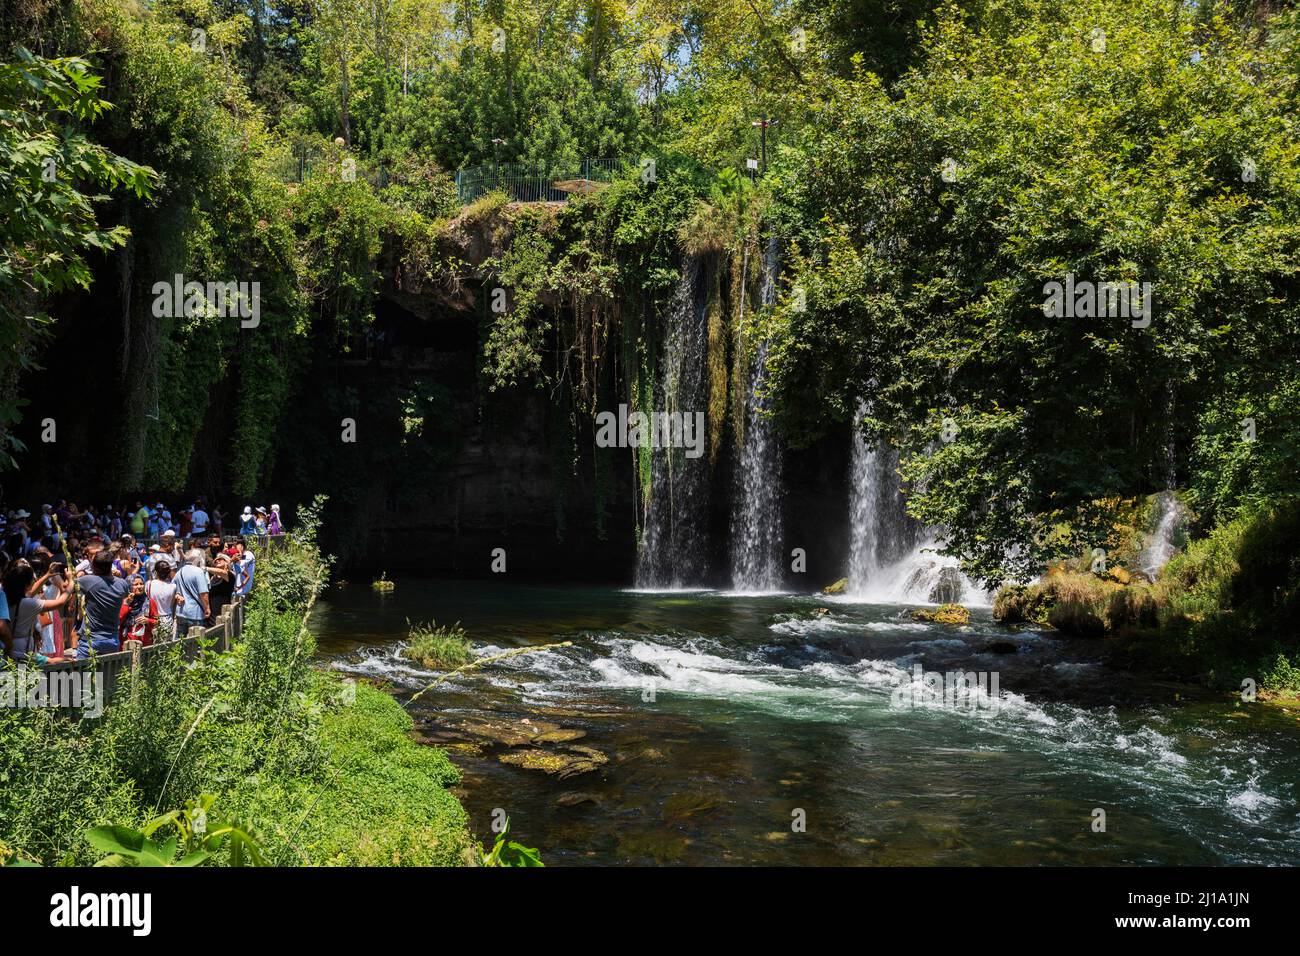 06-07-2022 Antalya Turkey. People are walking around Duden waterfall and taking pictures. Walking areas among the trees. Stock Photo